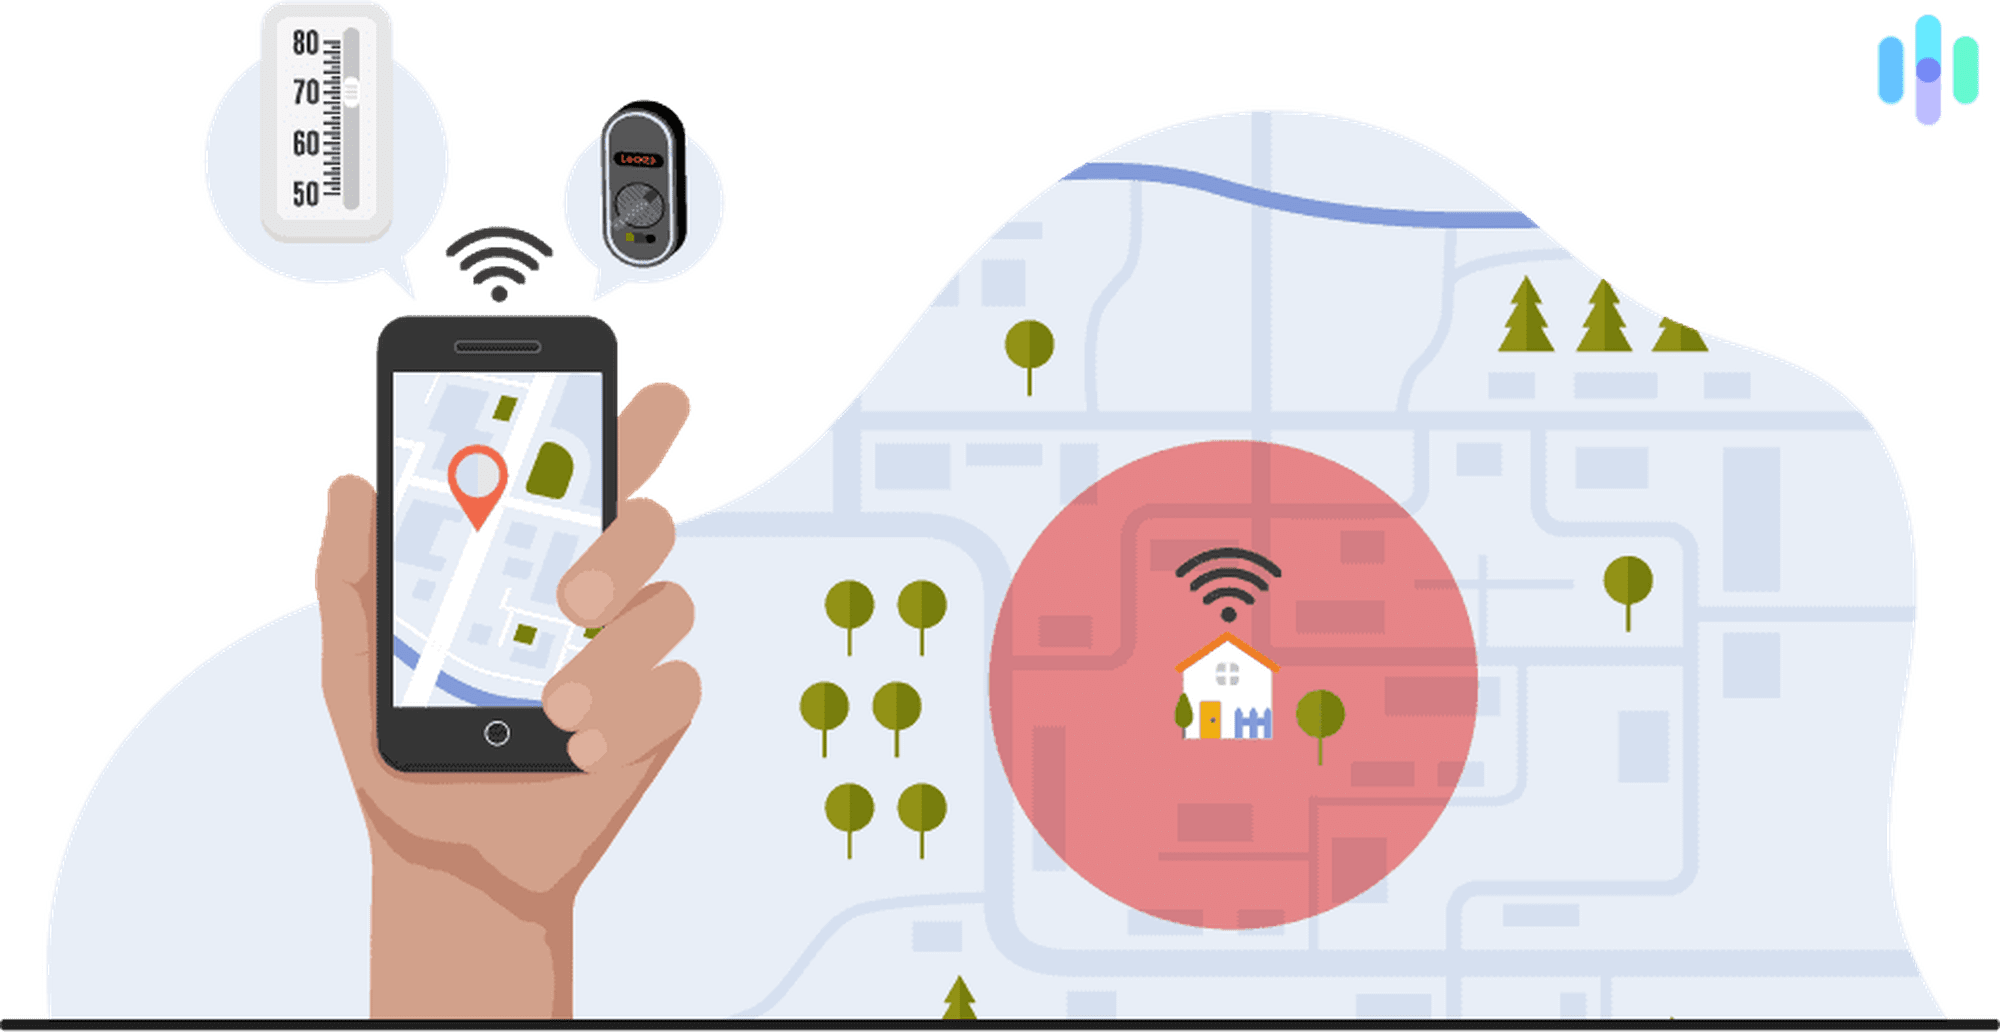 Smart Home: A Complete Guide for a Connected House